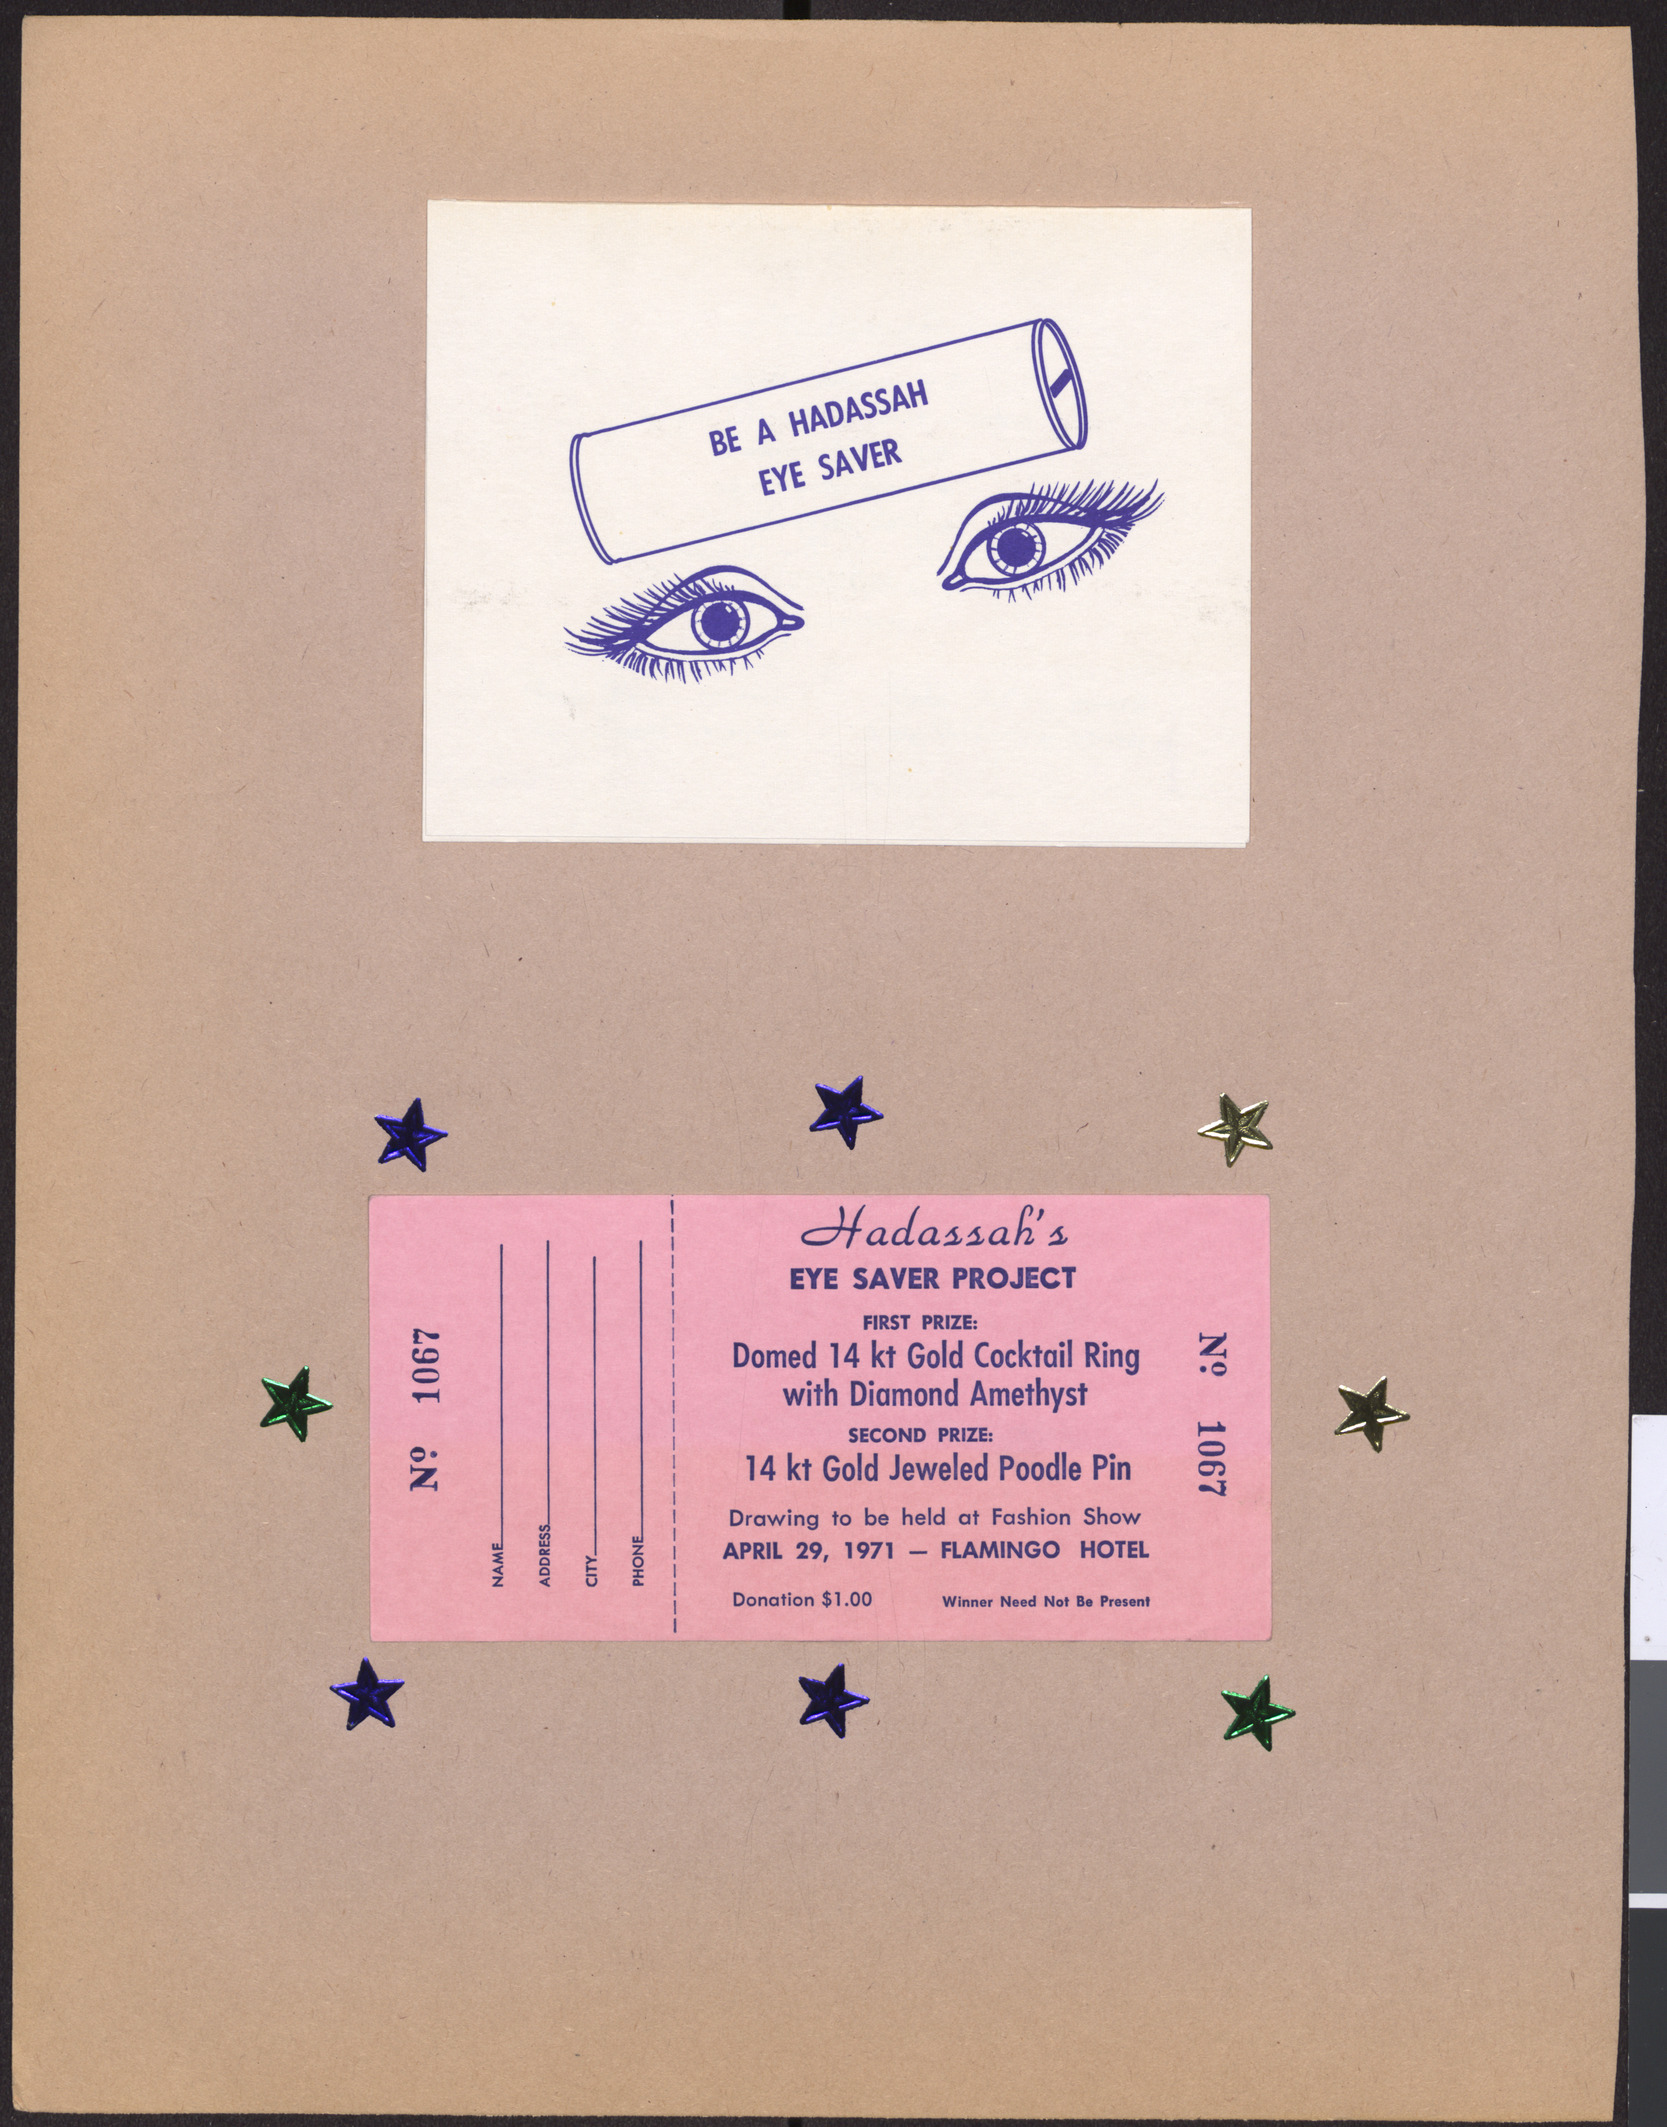 Invitation to Be a Hadassah Eye Saver, and raffle ticket for Hadassah's Eye Saver Project drawing, April 29, 1971